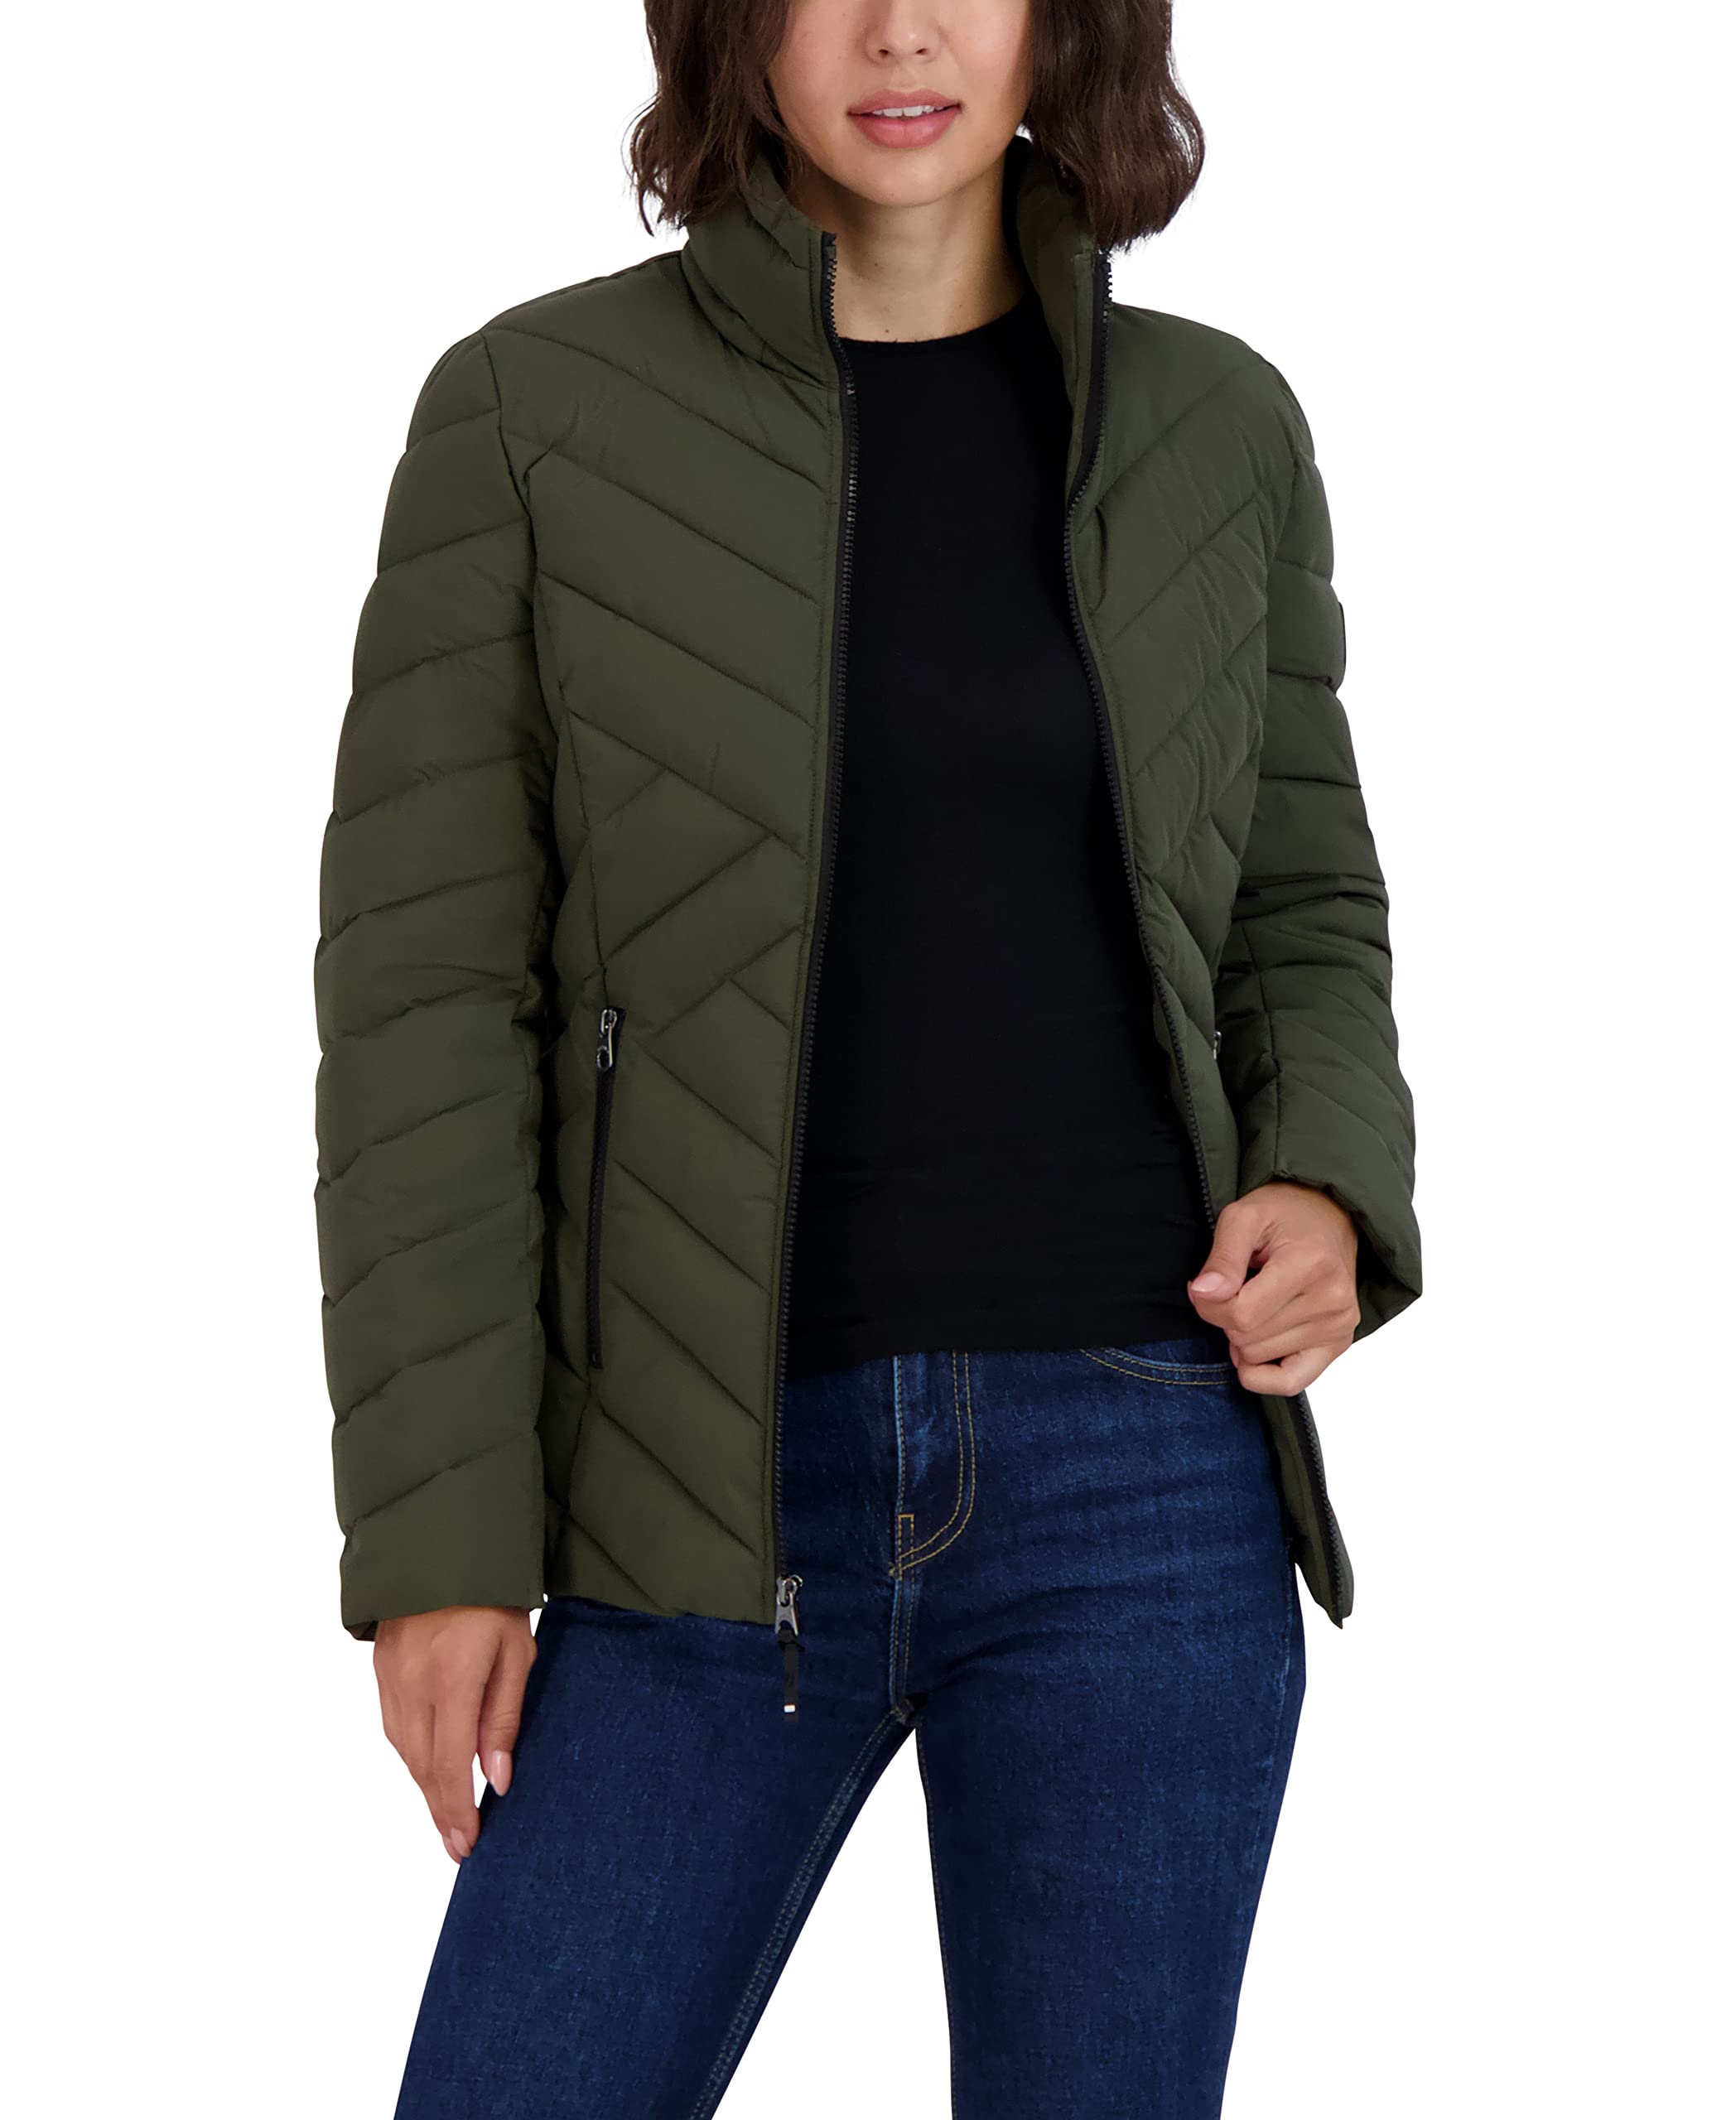 Nautica Women's Short Stretch Lightweight Puffer Jacket with Removeable Hood